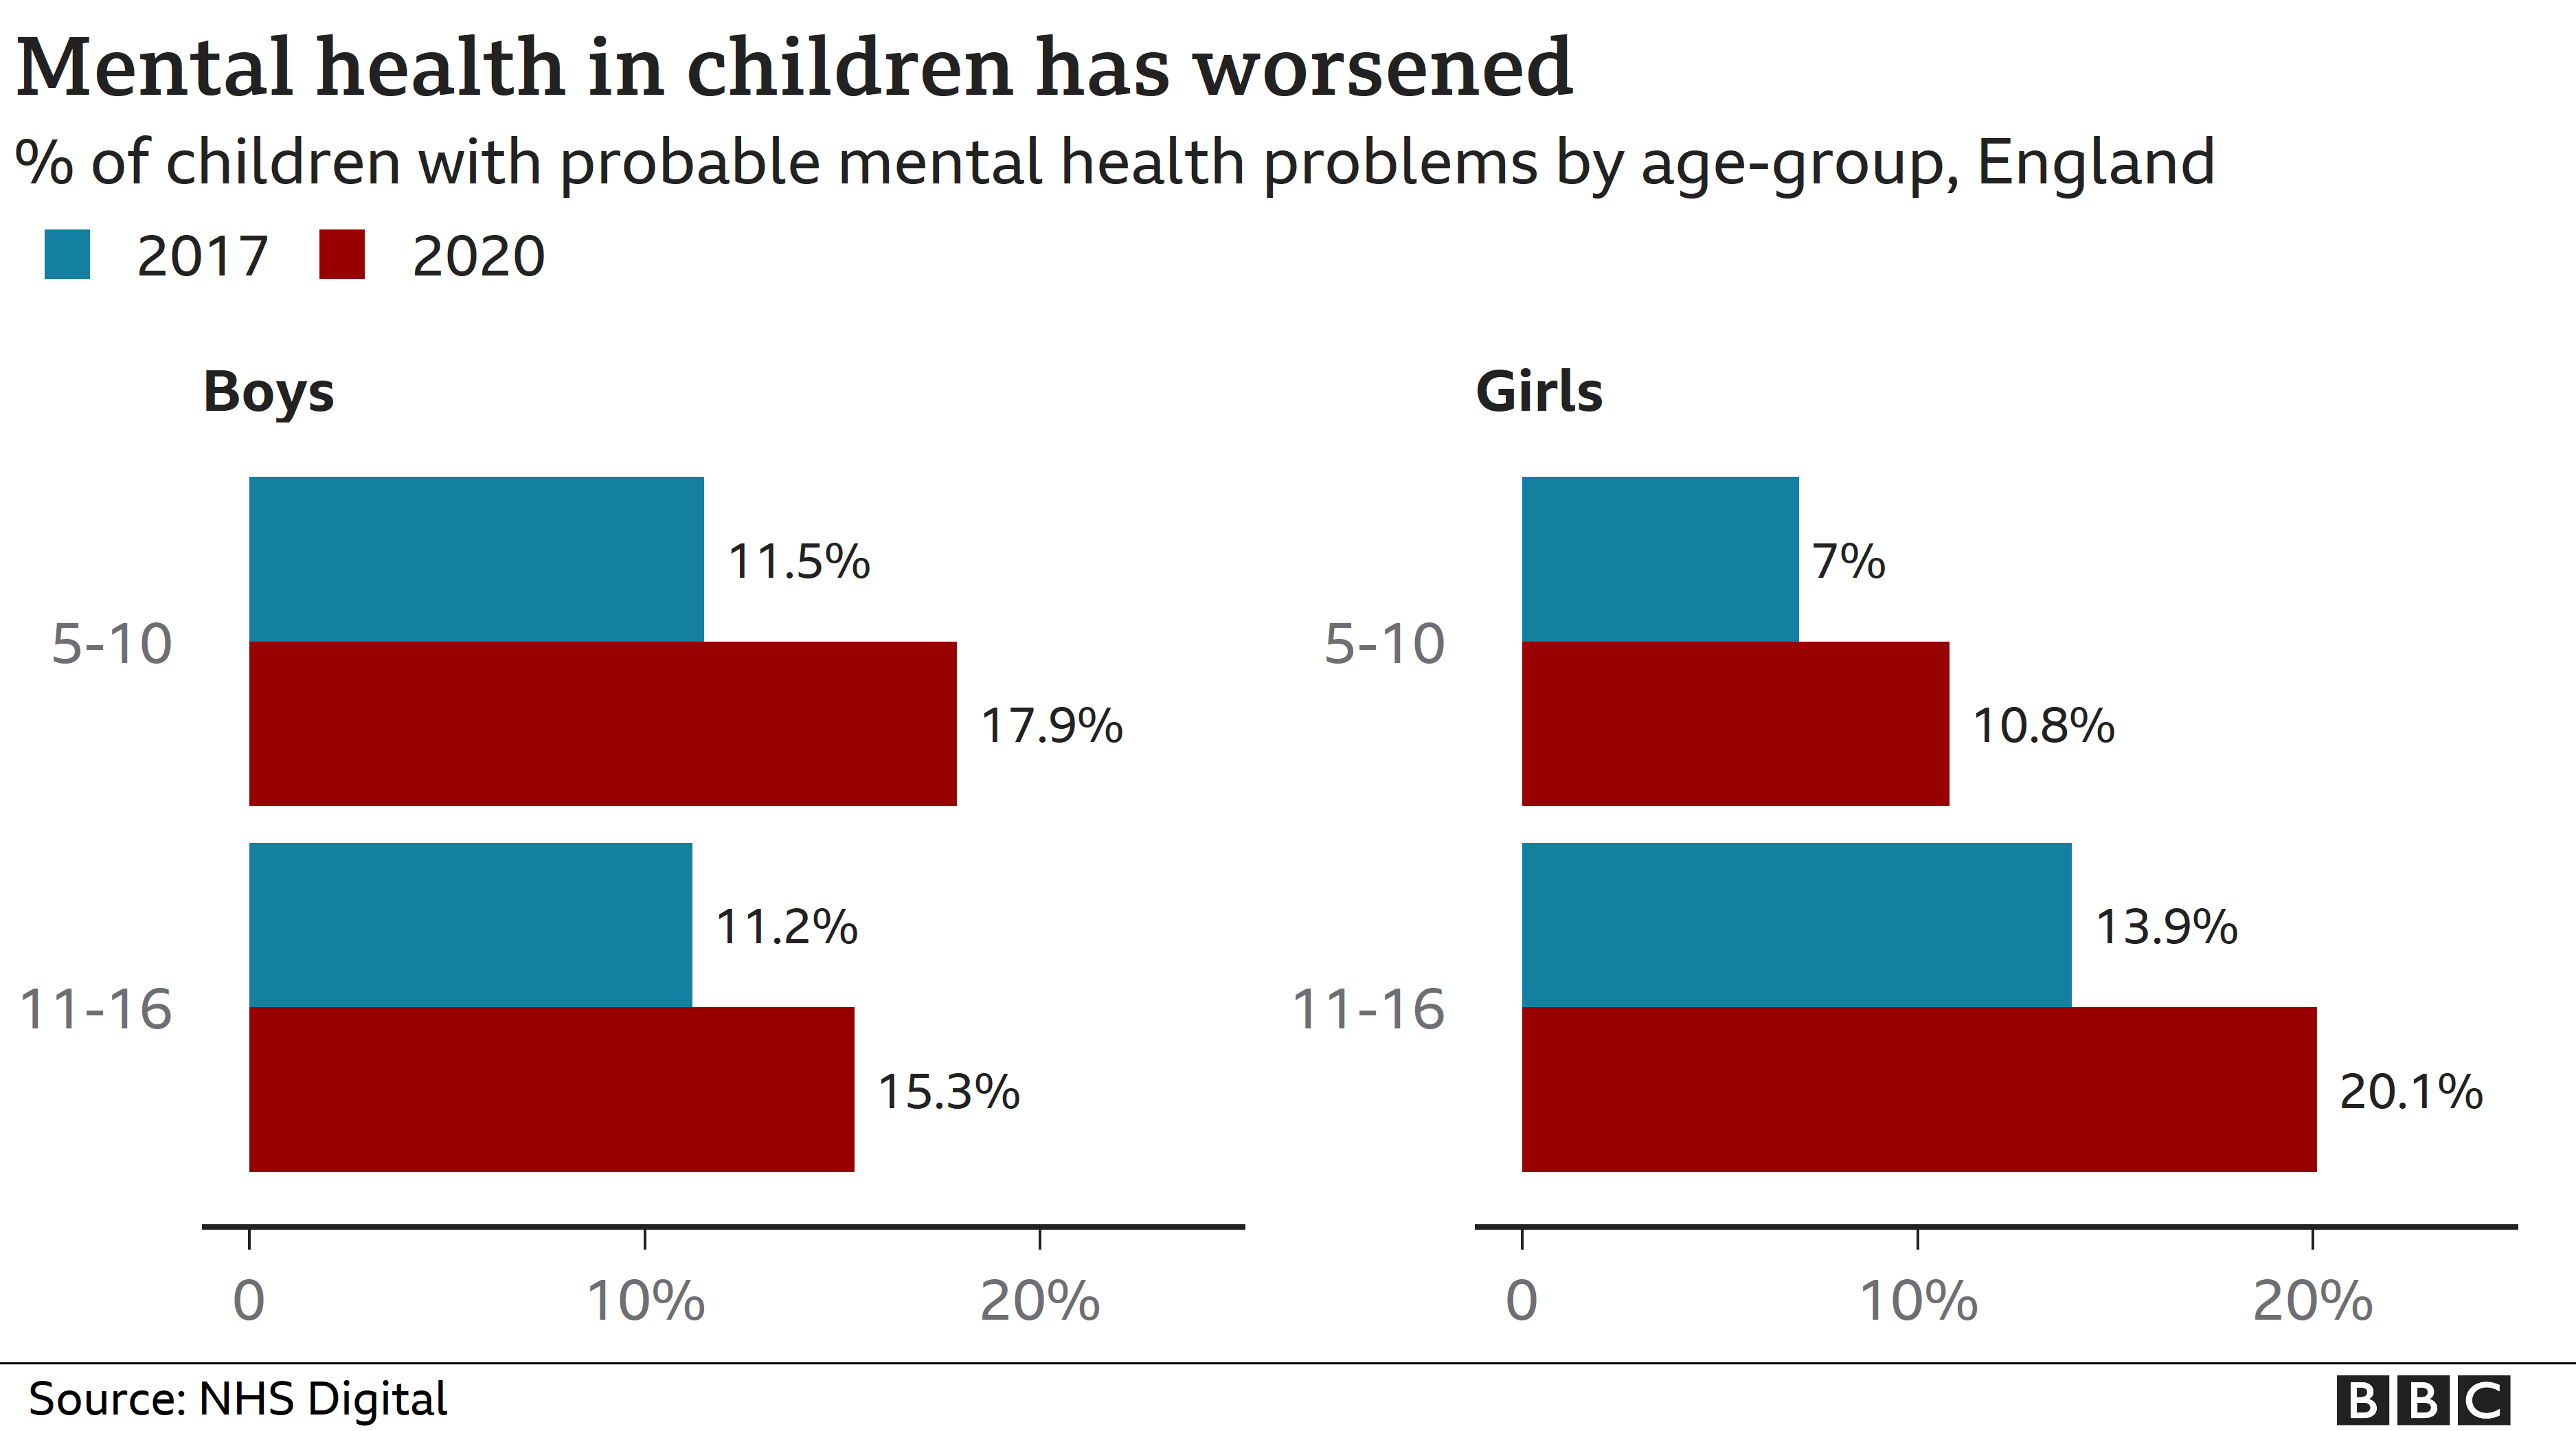 Chart showing mental health problems by age